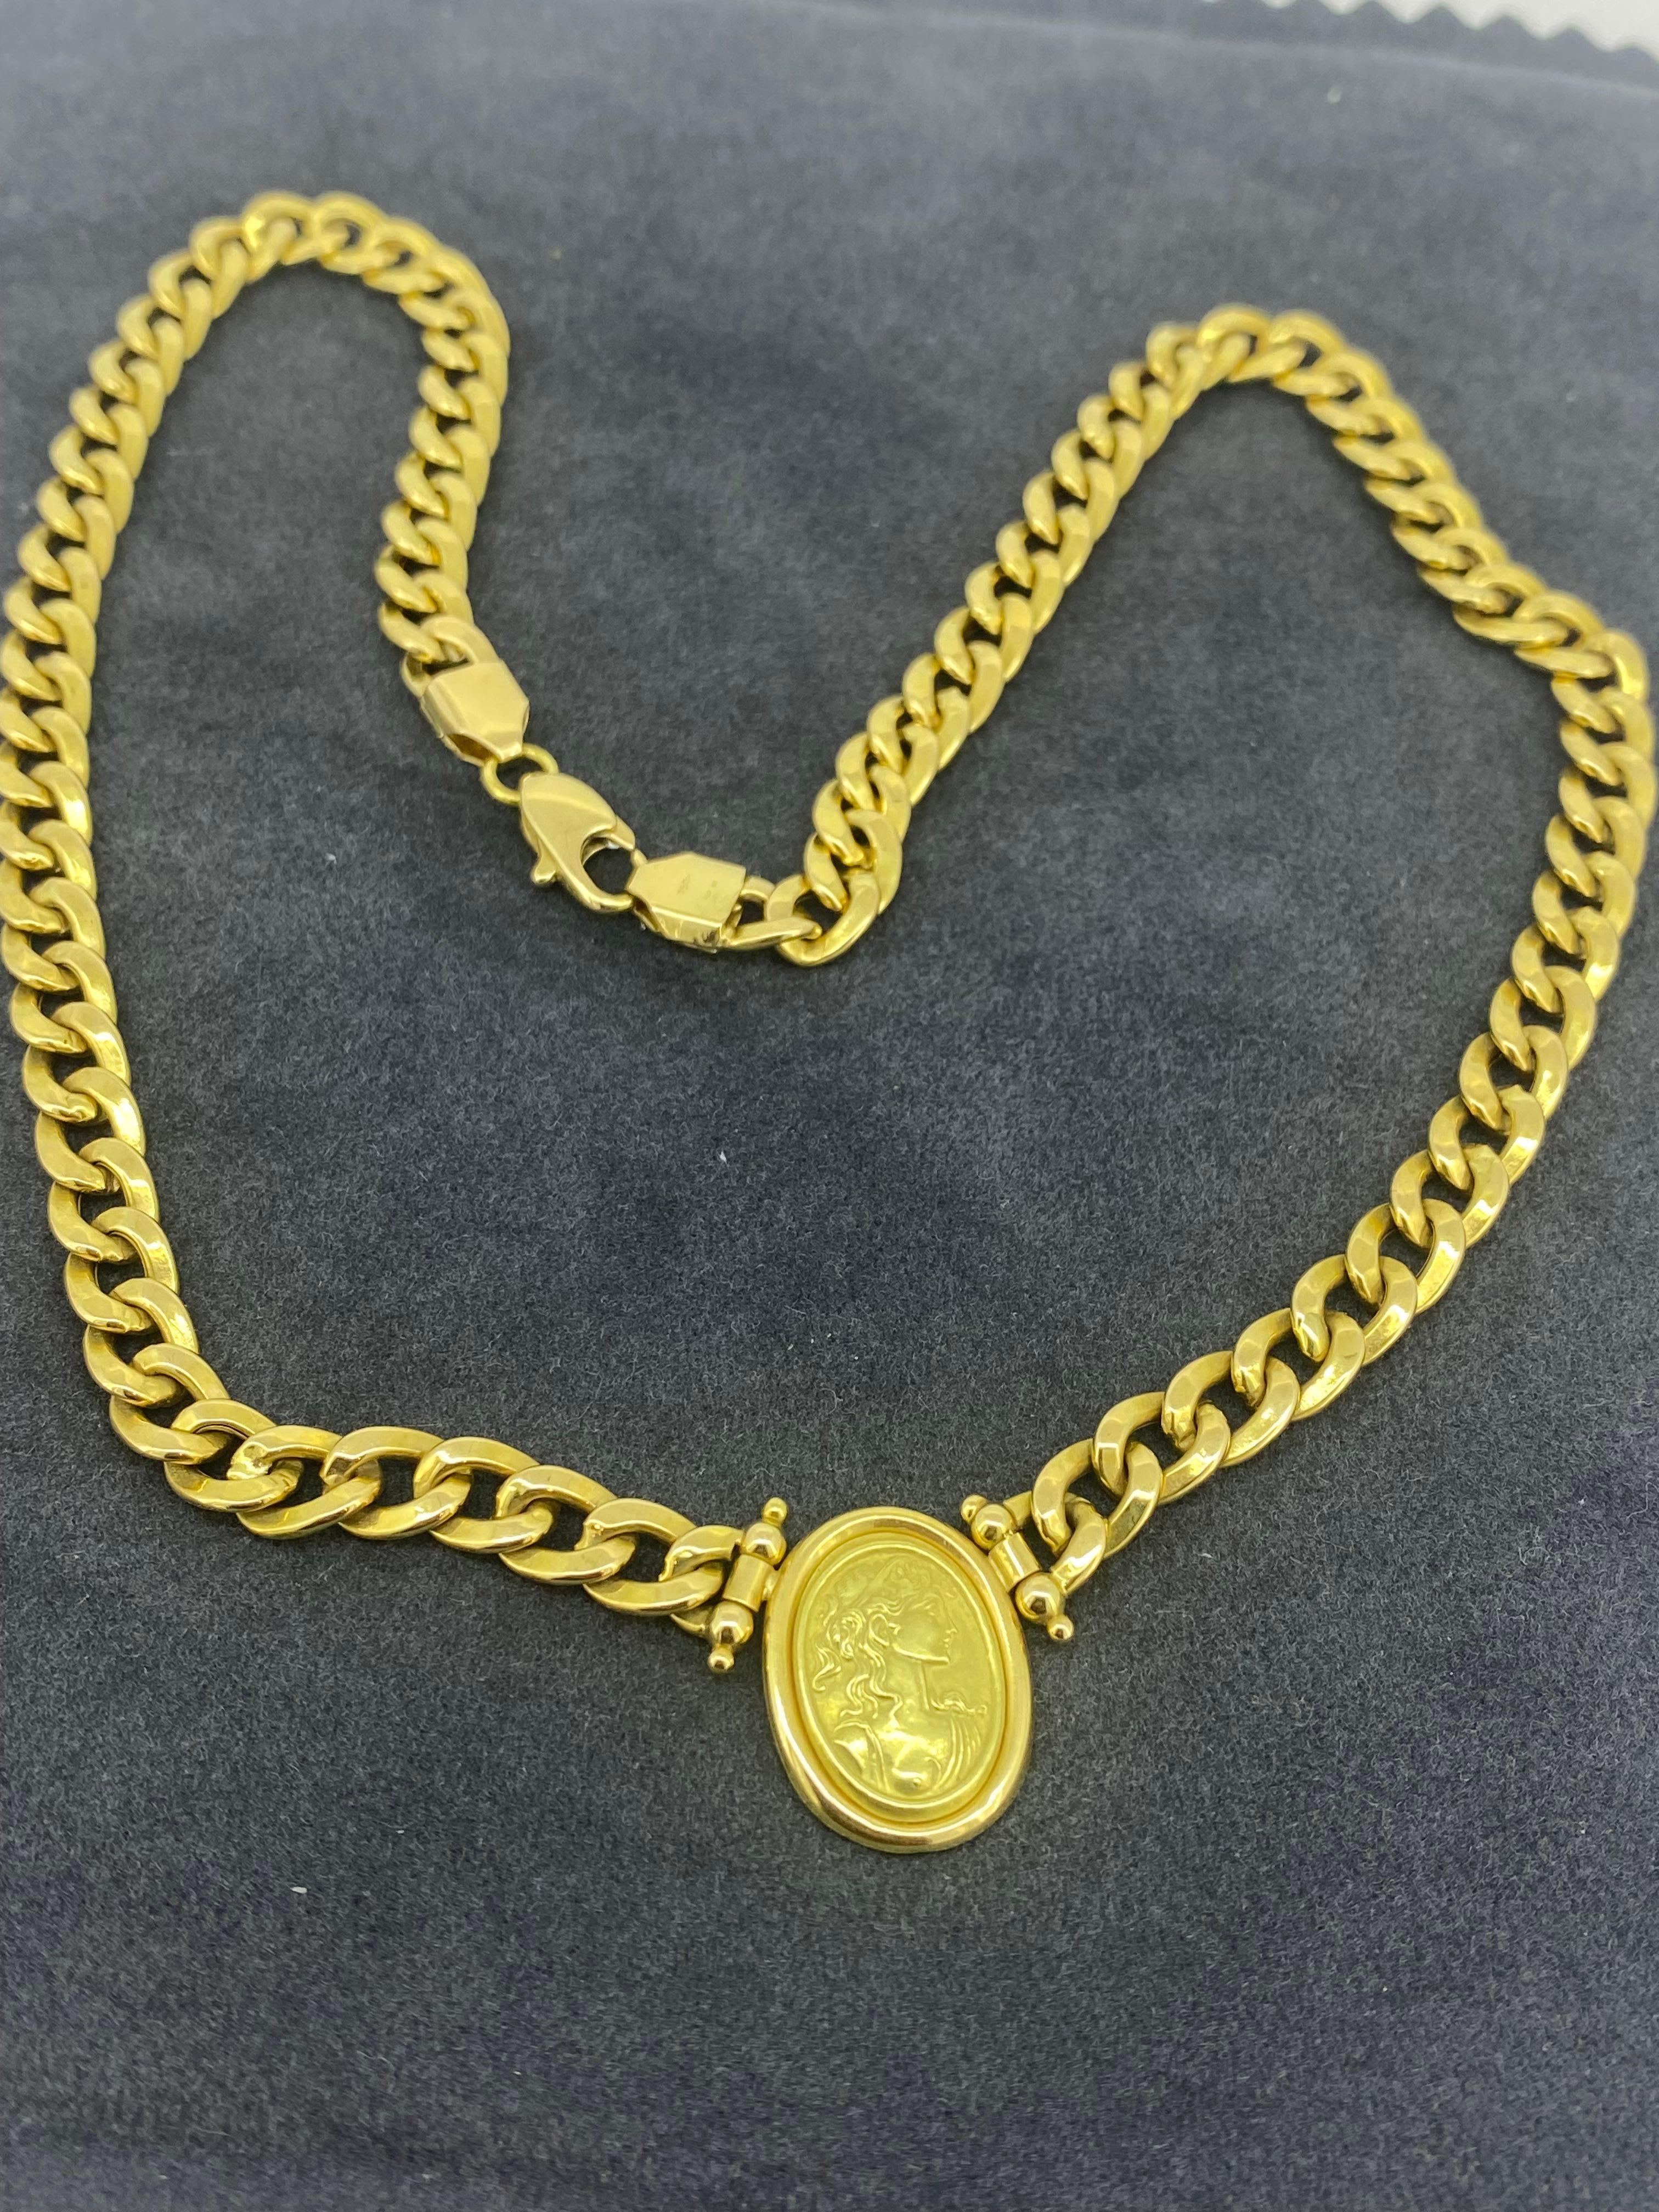 18K Yellow Gold Cameo Pendant Italian Vintage Necklace, Curb Links, 44cm long. For Sale 2